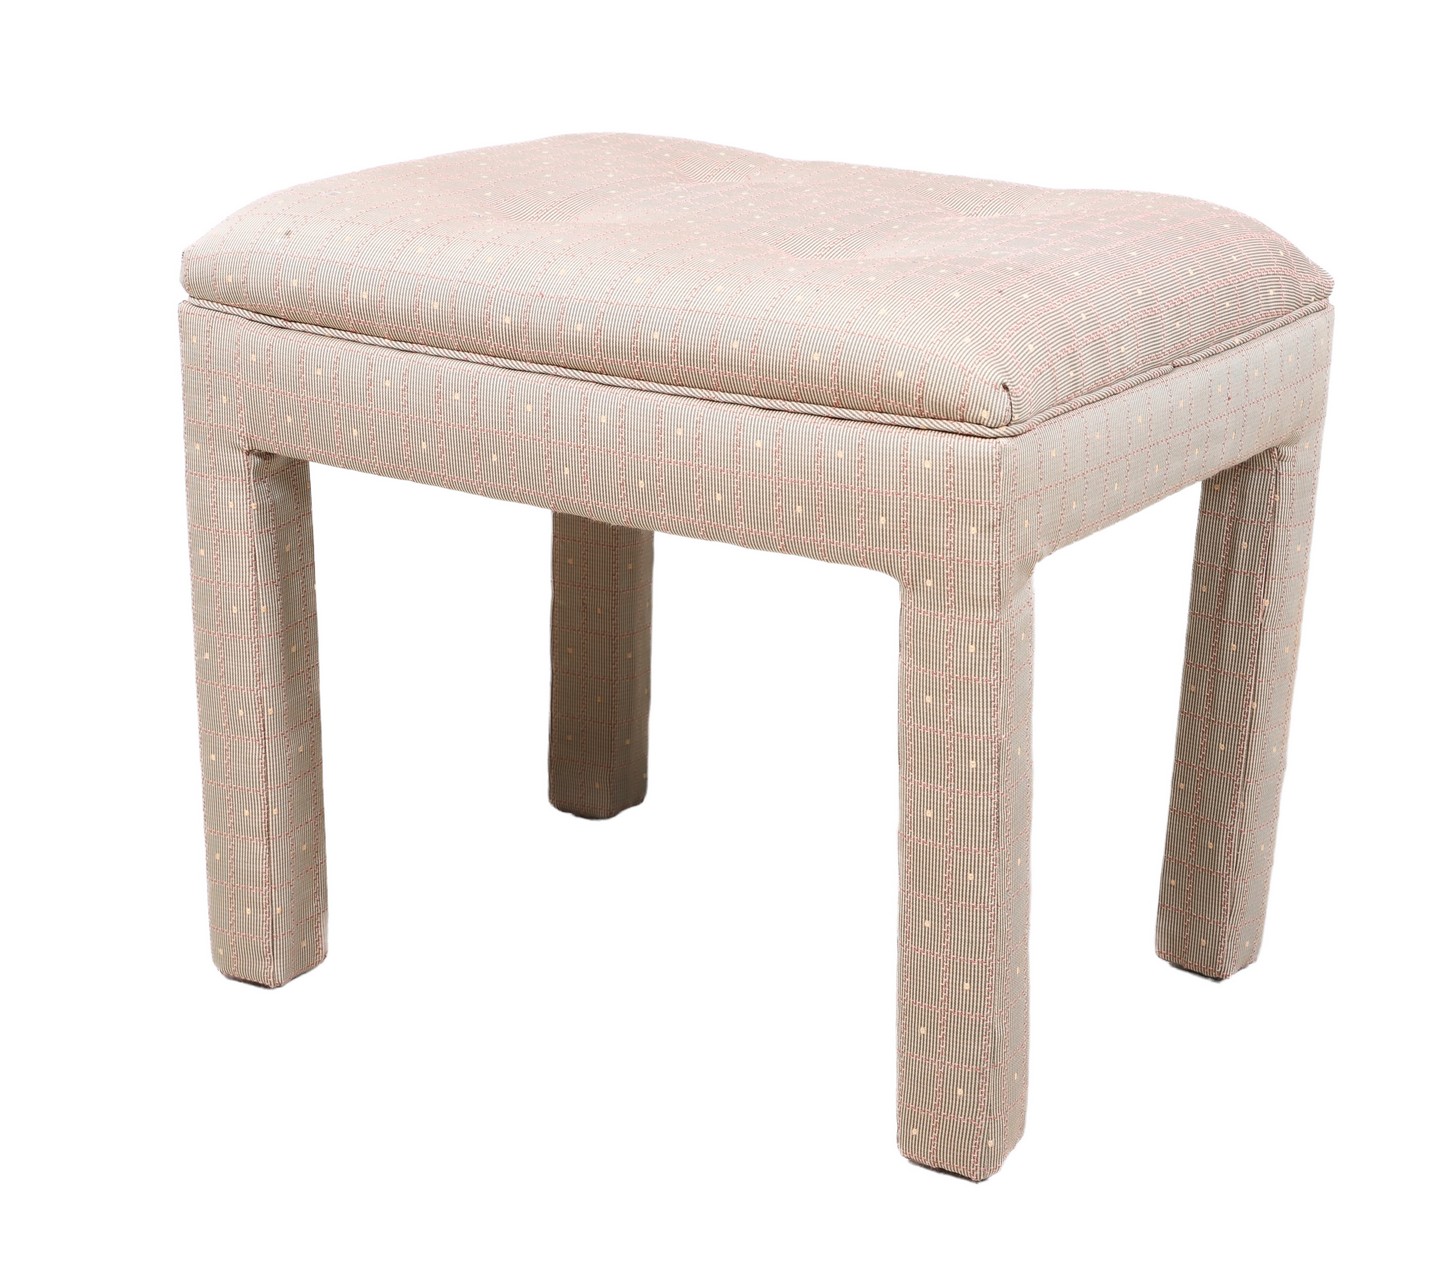 Parsons style Tufted upholstered 317e16